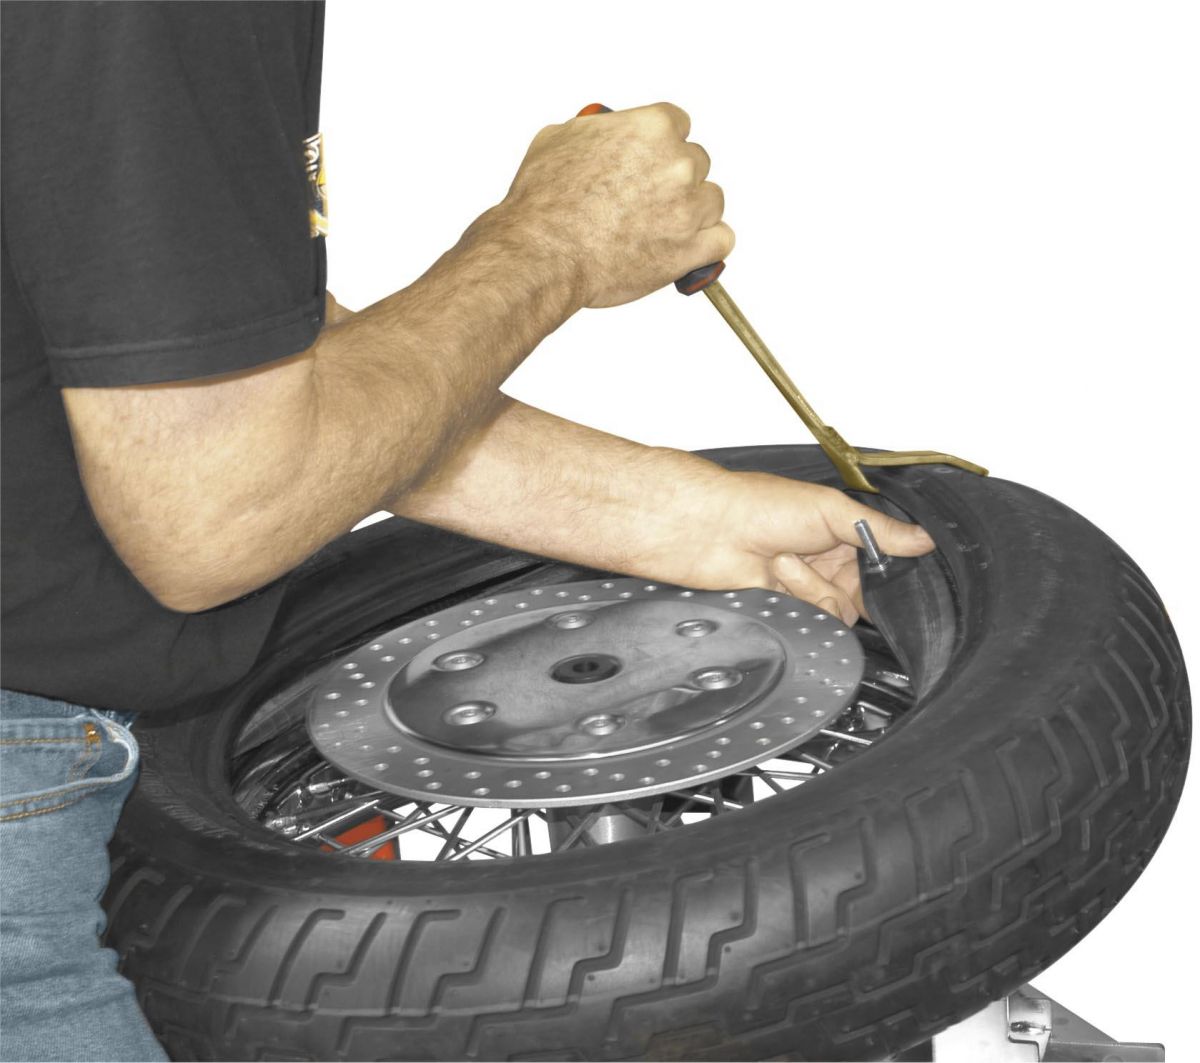 Motorcycle tire inspection